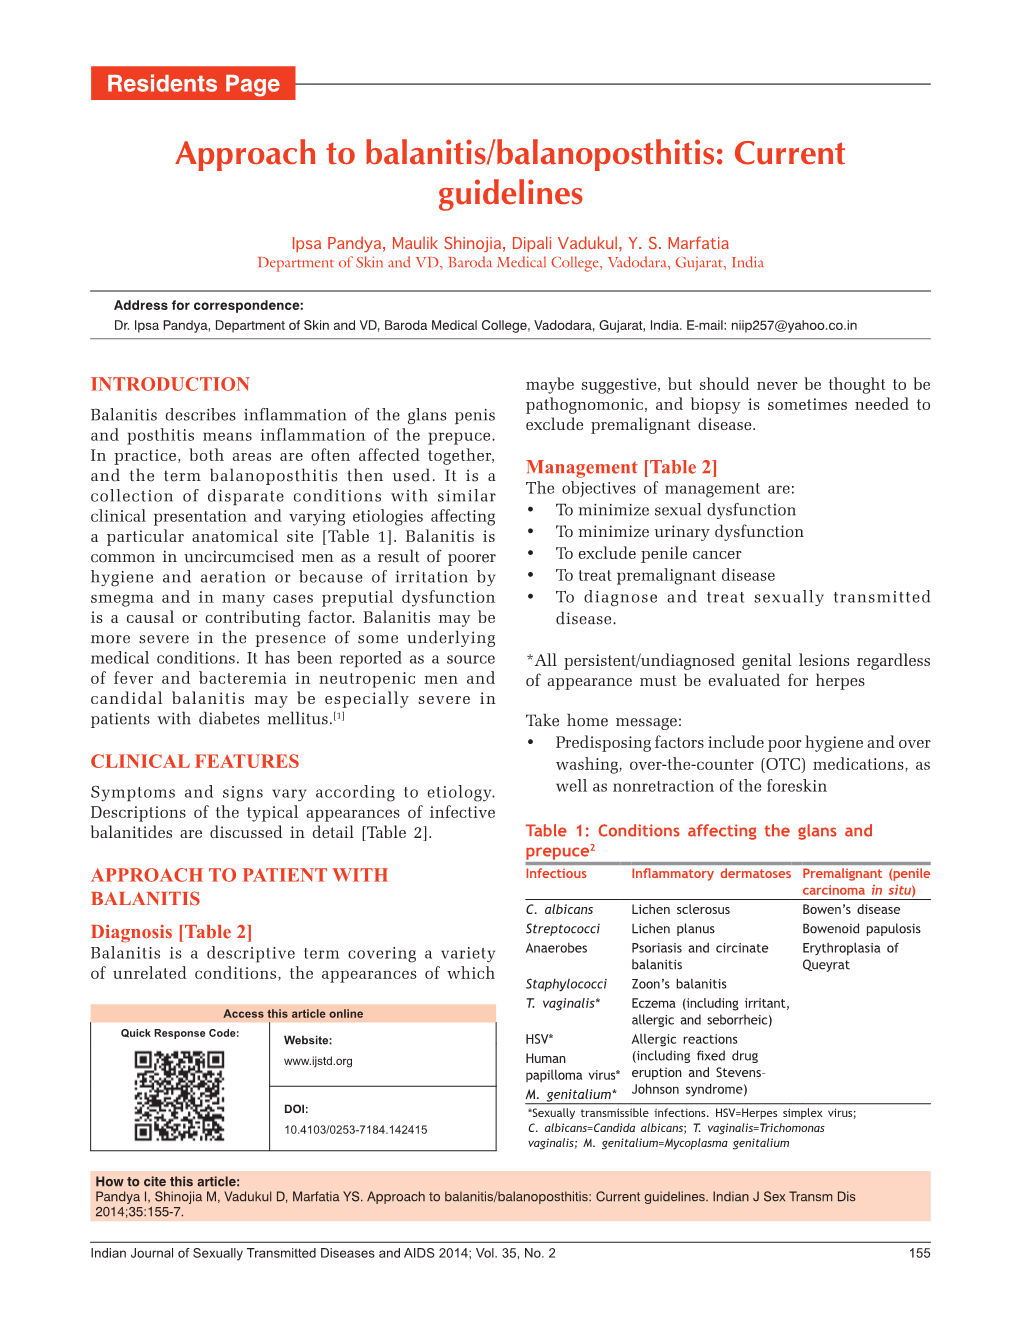 Approach to Balanitis/Balanoposthitis: Current Guidelines